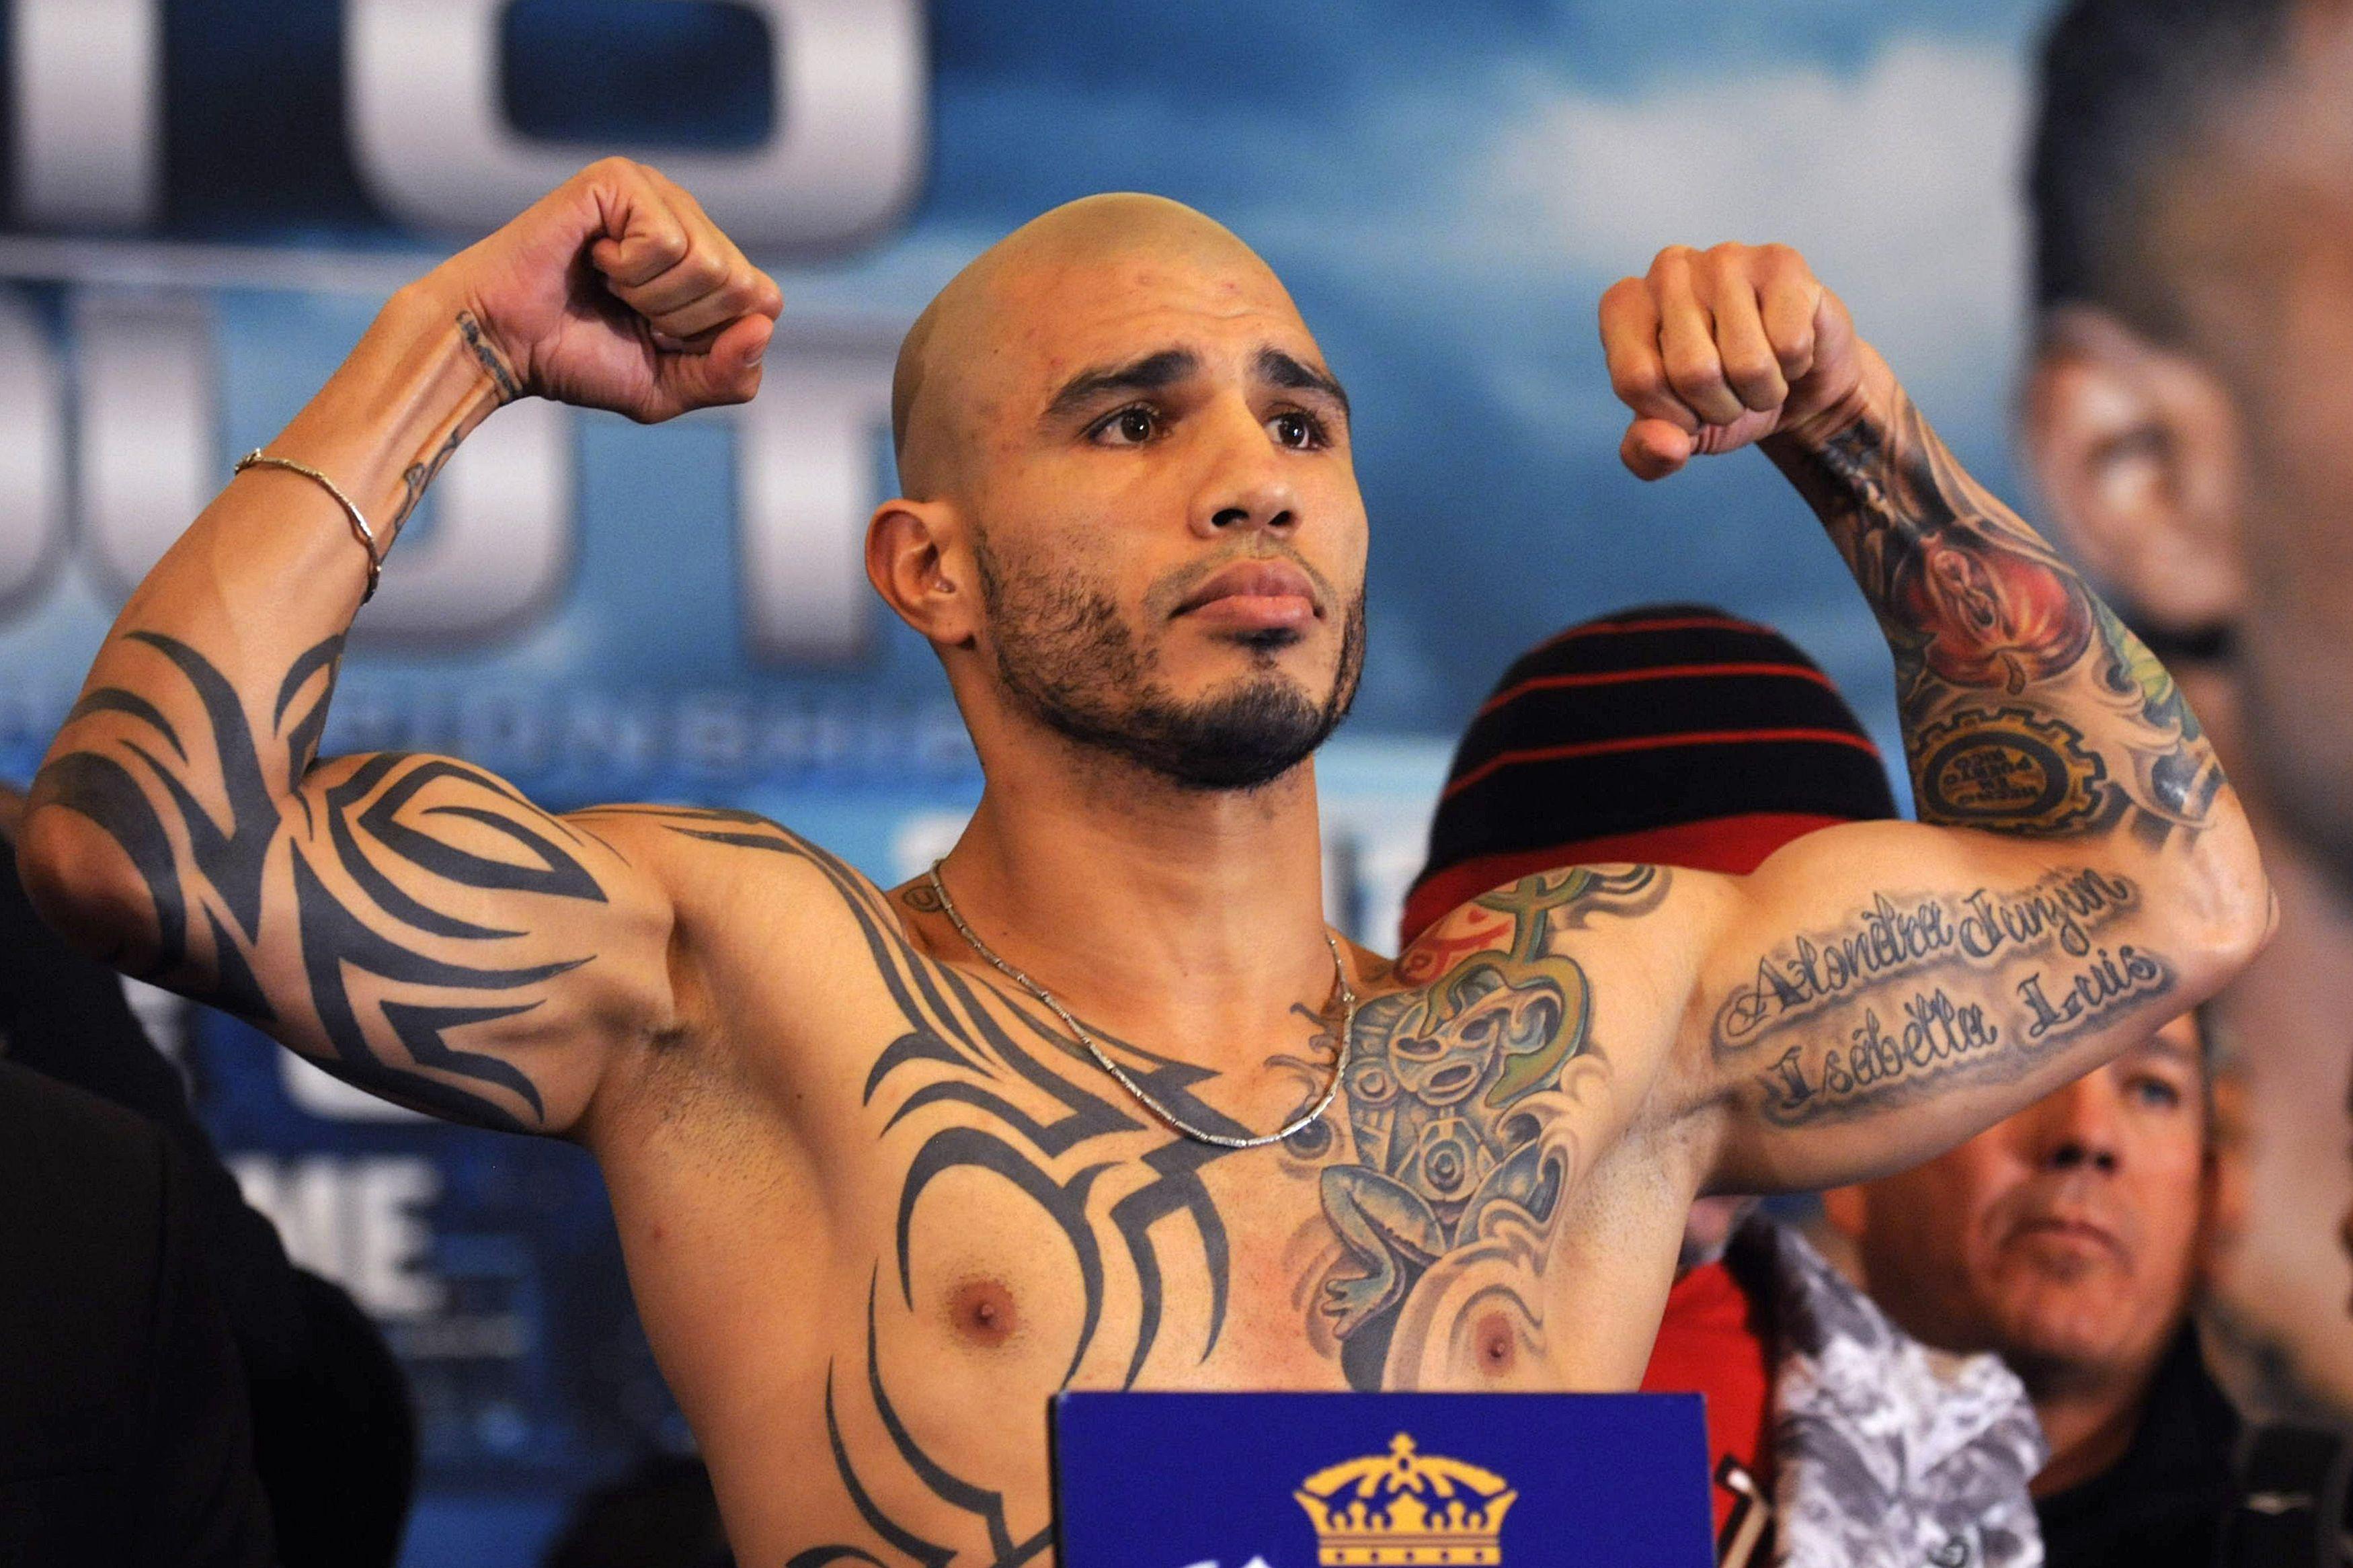 Miguel Cotto. U.S. News in Photo. Claudia's Image